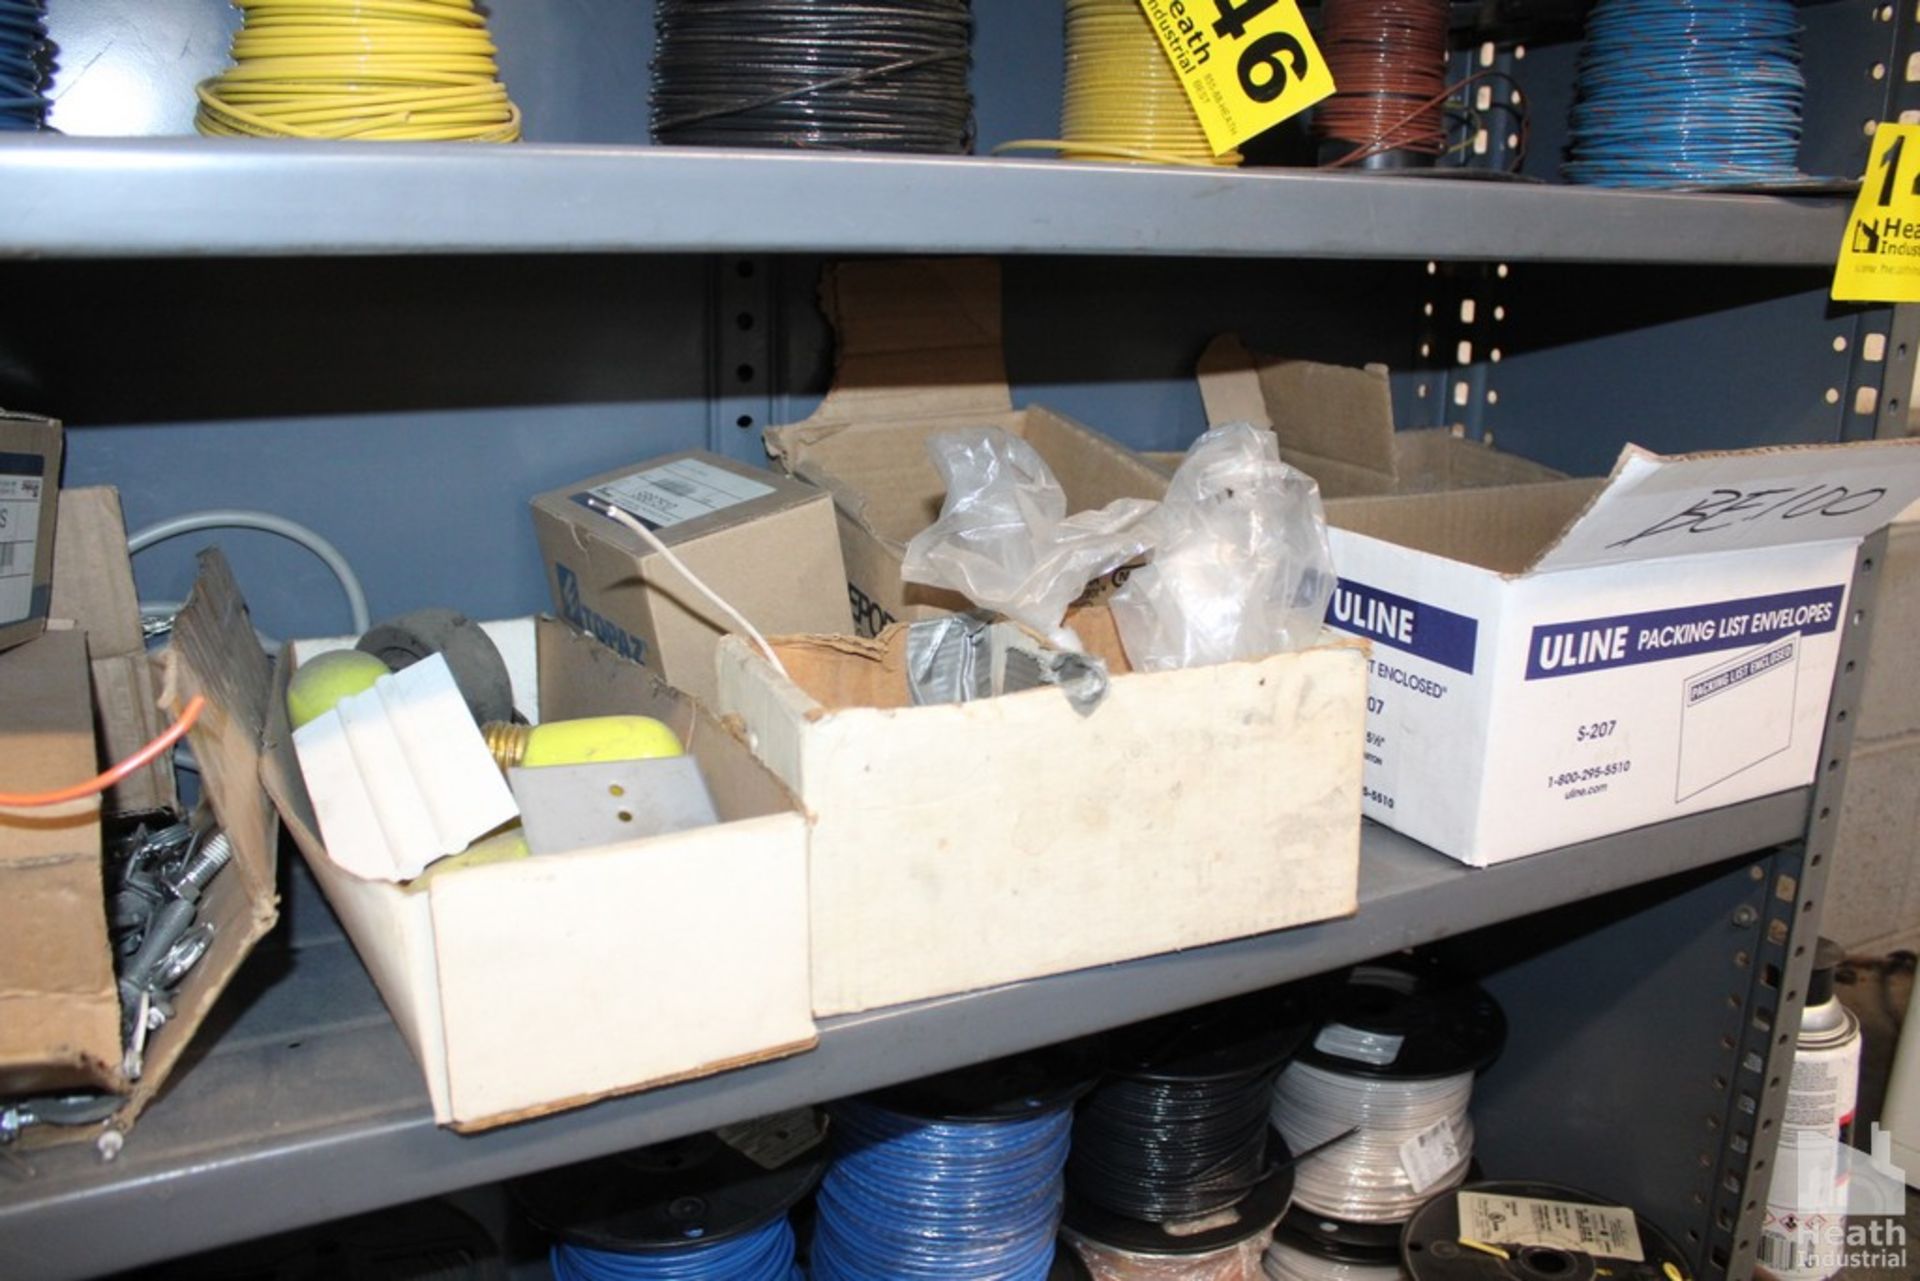 ELECTRICAL WIRE AND ELECTRICAL SUPPLIES ON TWO SHELVES - Image 2 of 2